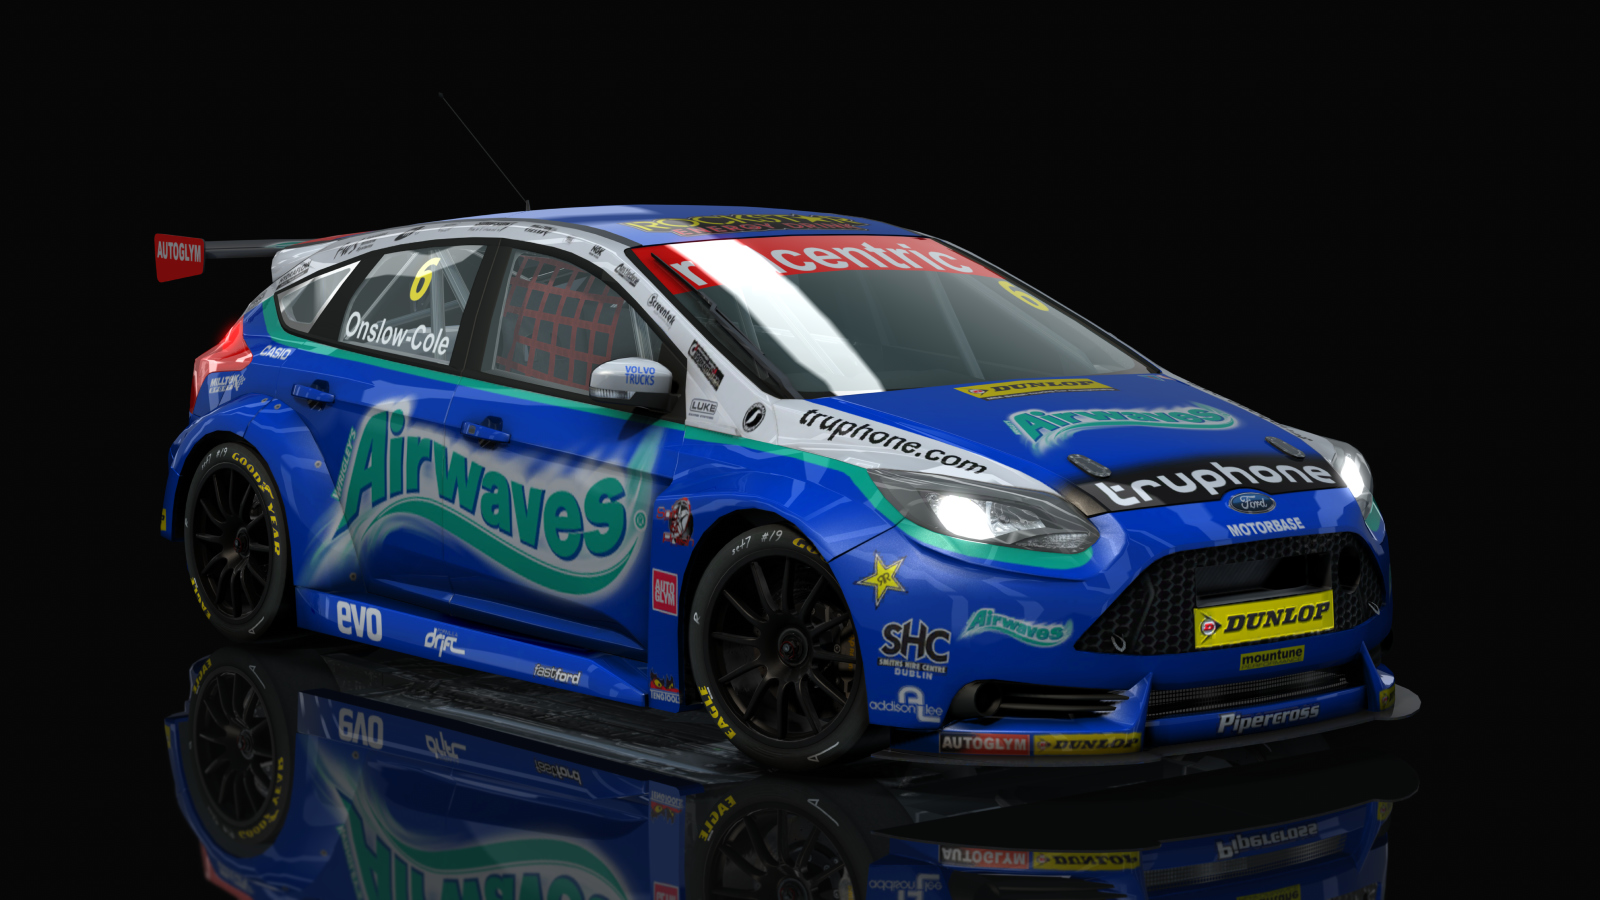 Ford Focus ST, skin 2013_Onslow-Cole_6